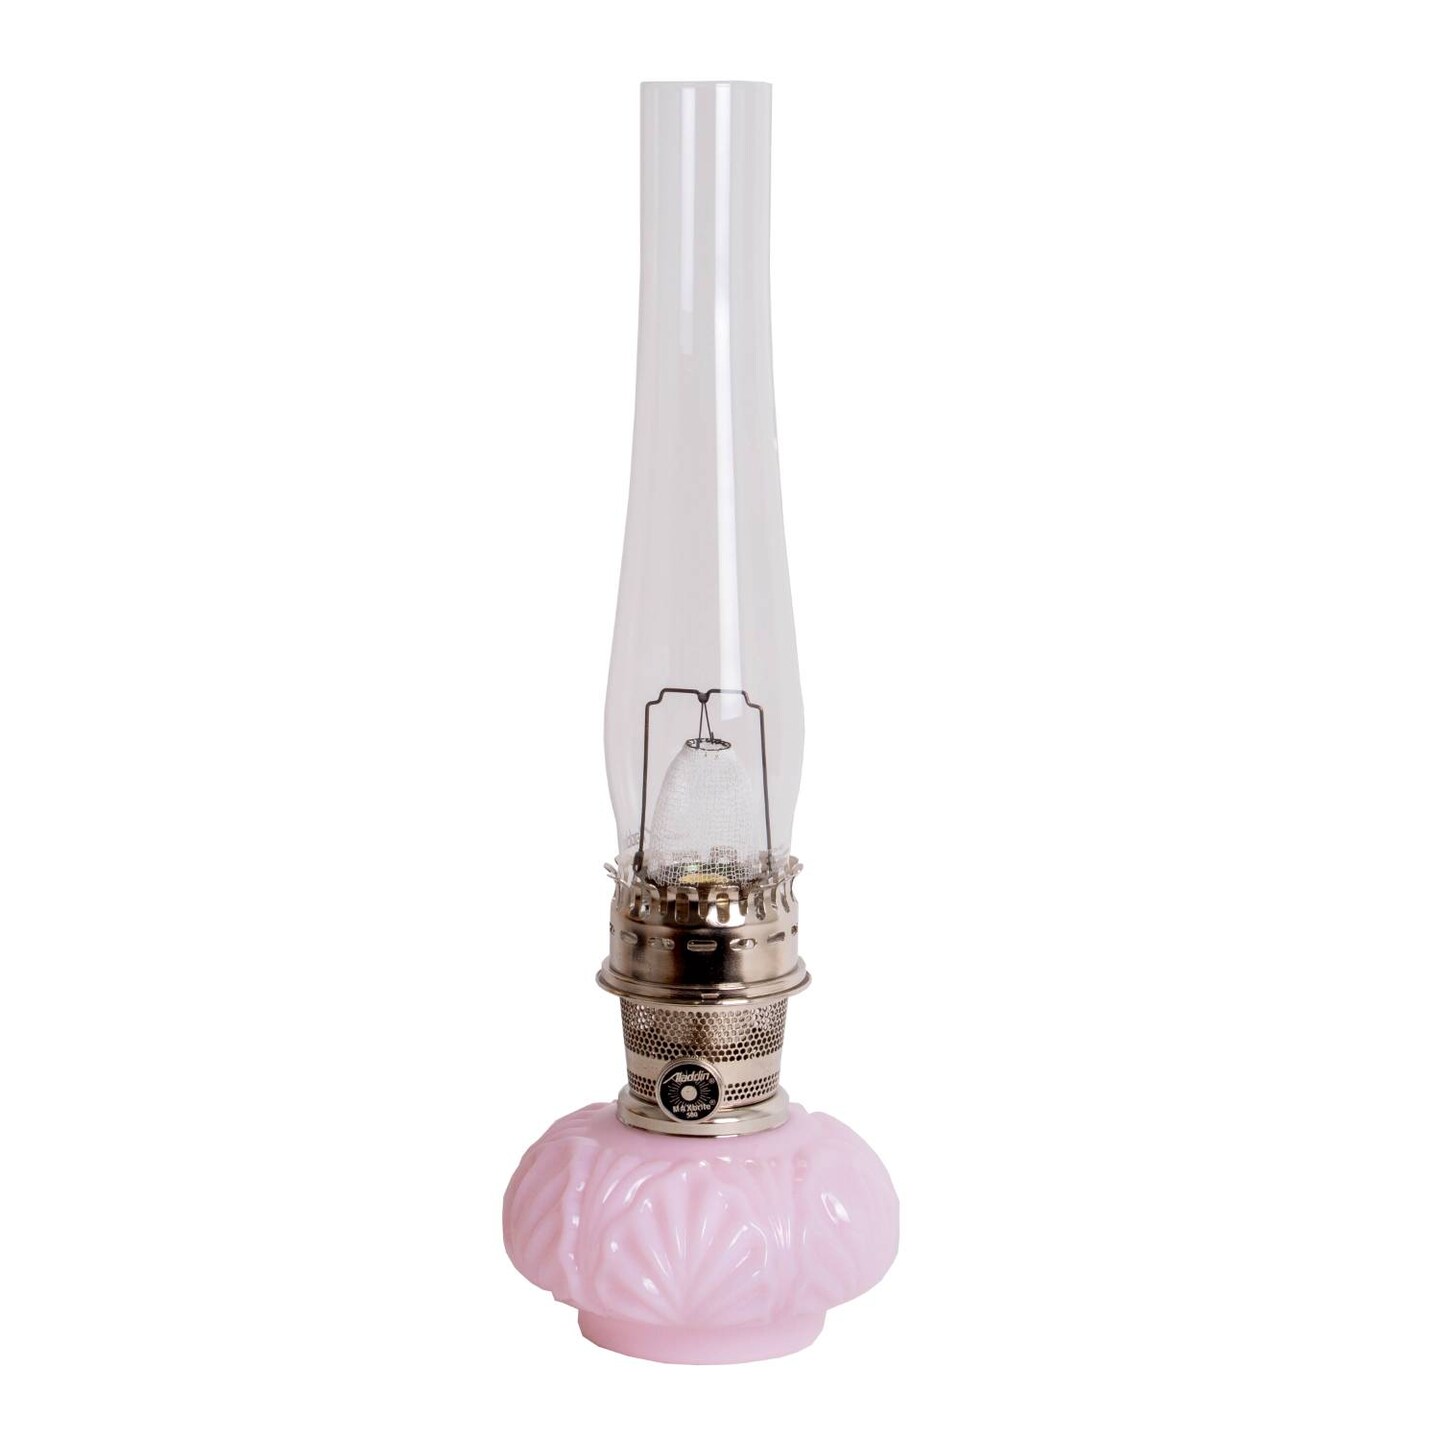 Aladdin Crown Tuscan Genie II Oil Lamp for Shelf or Table, Indoor Emergency  Lighting, Limited Edition in Pink Glass with Brass or Nickel Burner